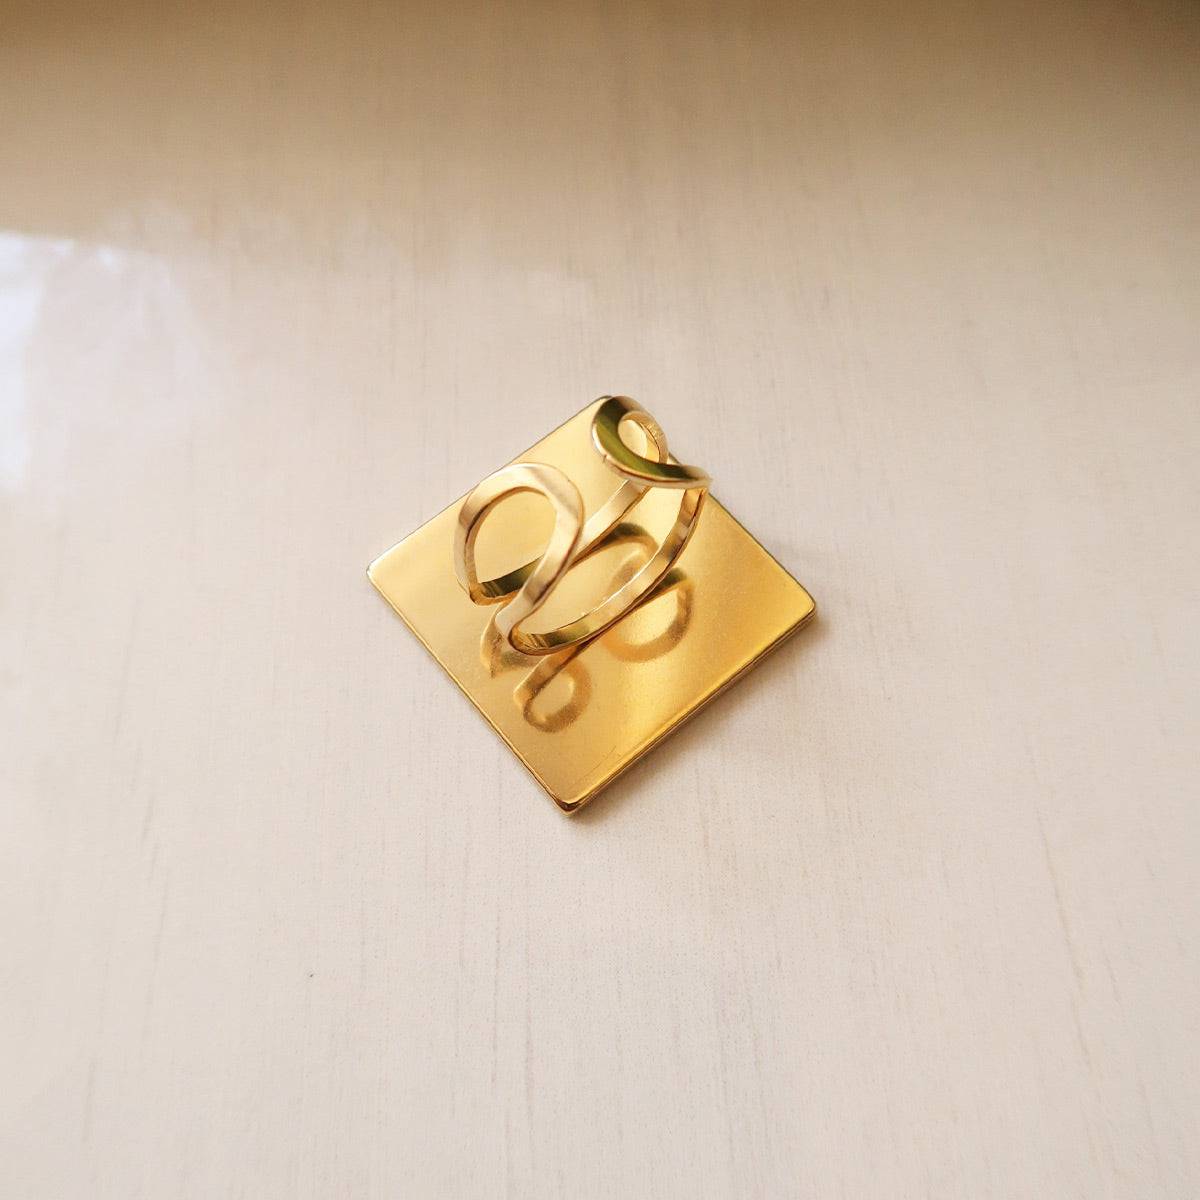 25 mm Square Ring Base - ClartStudios - Polymer clay Jewellery